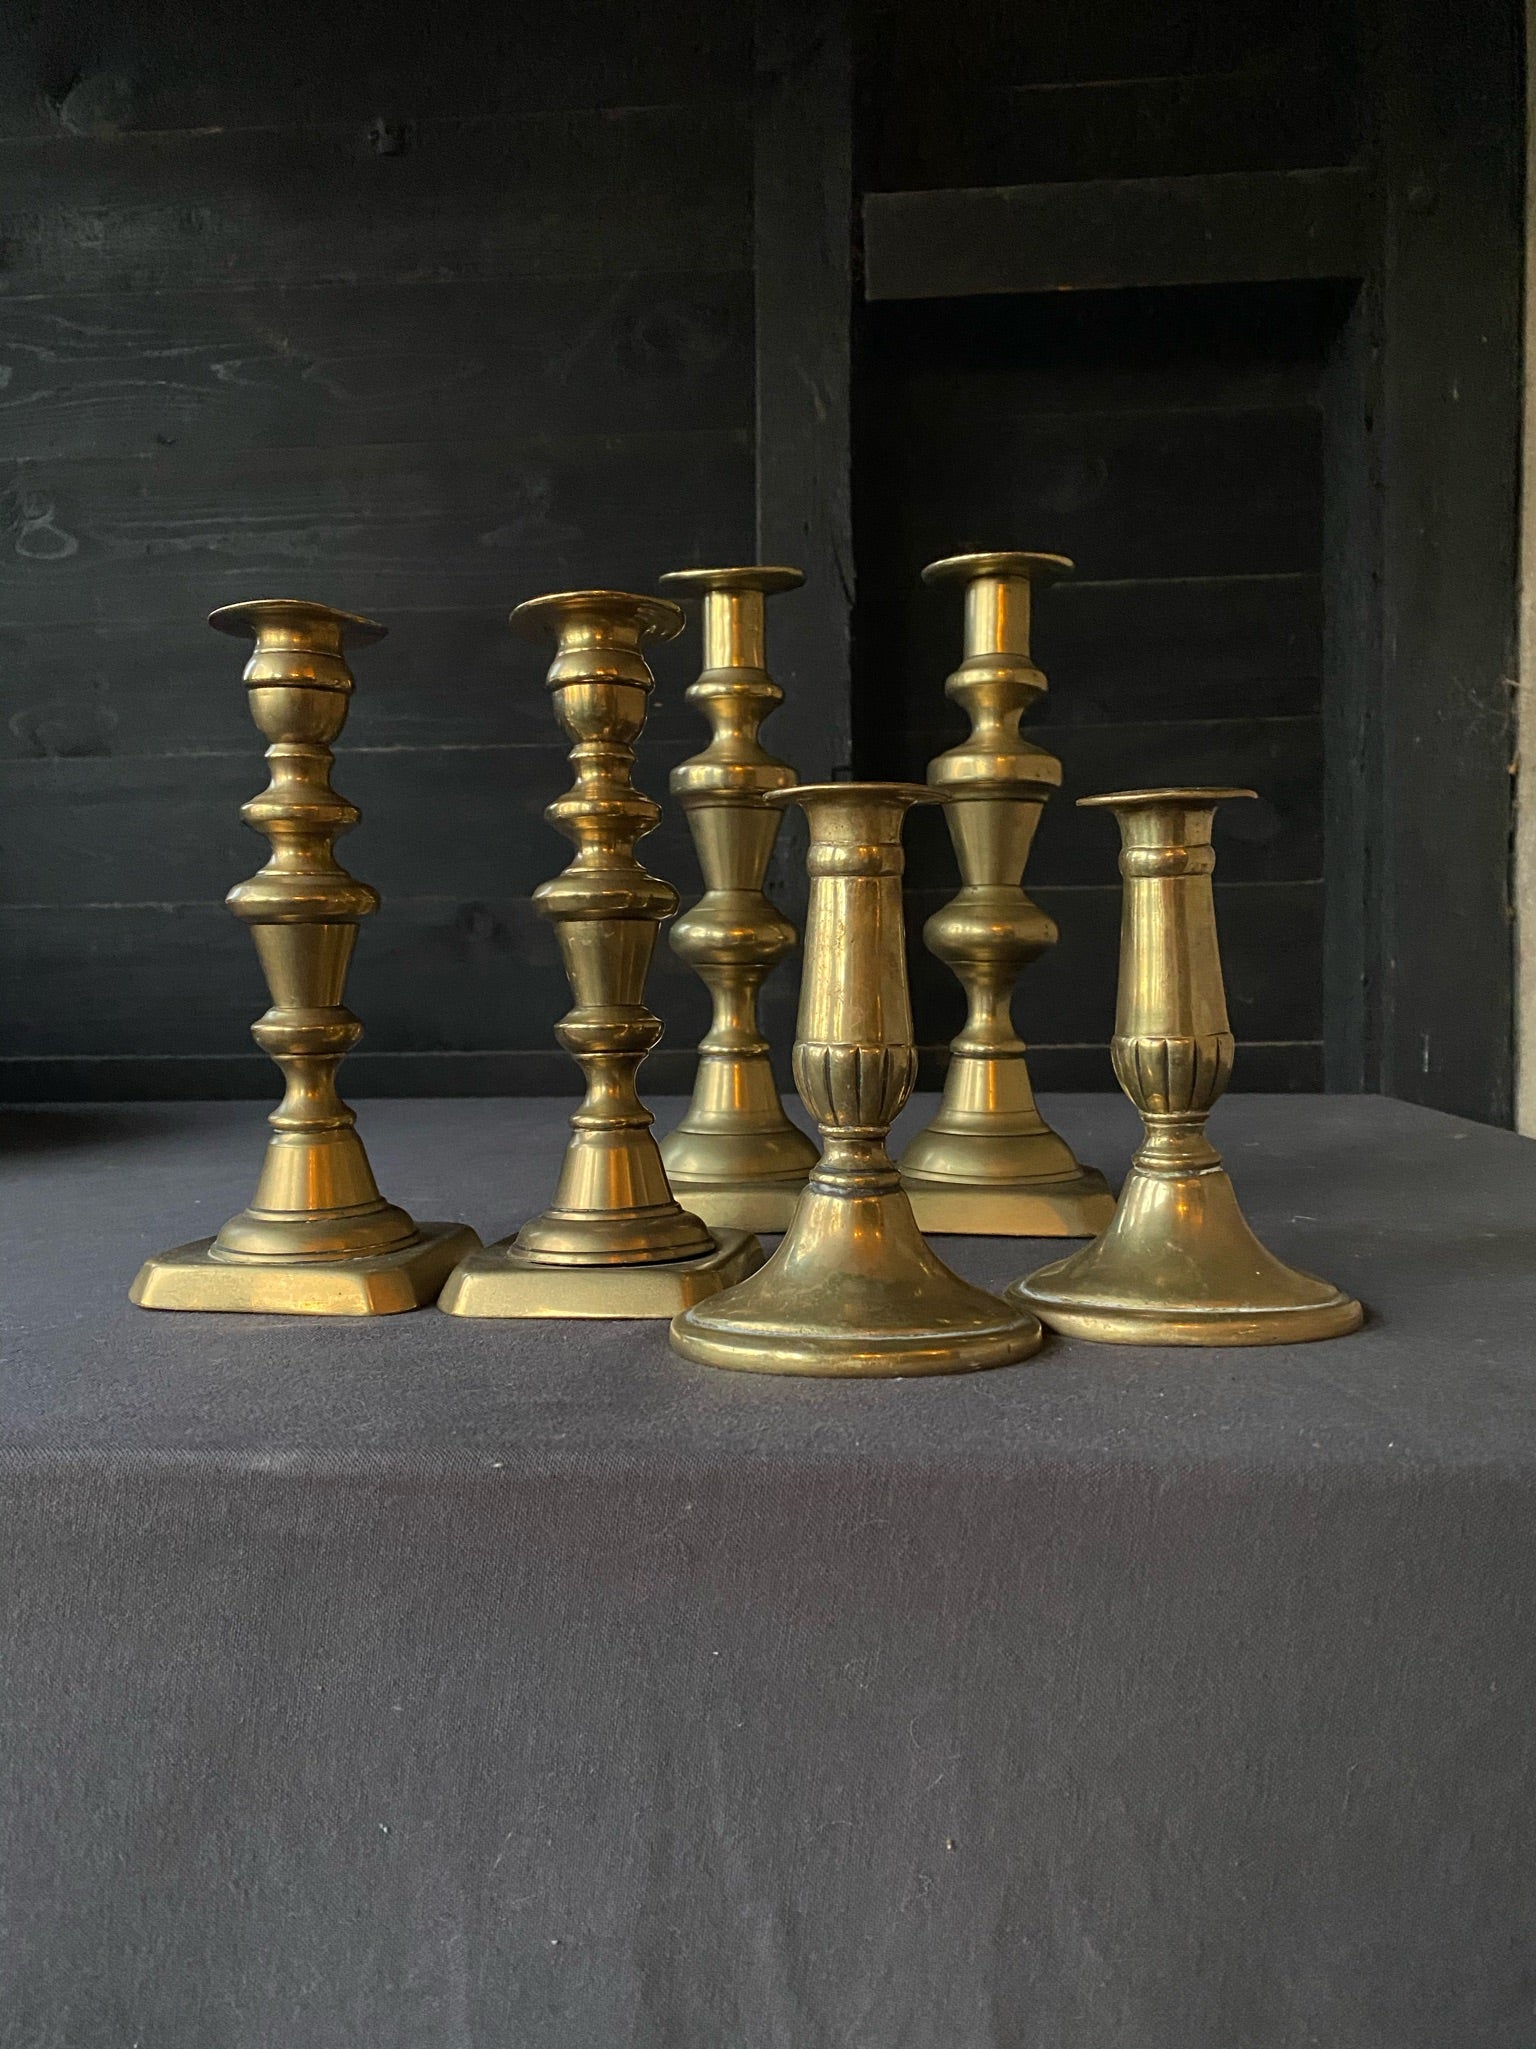 Small Pair of Vintage Brass Candlesticks